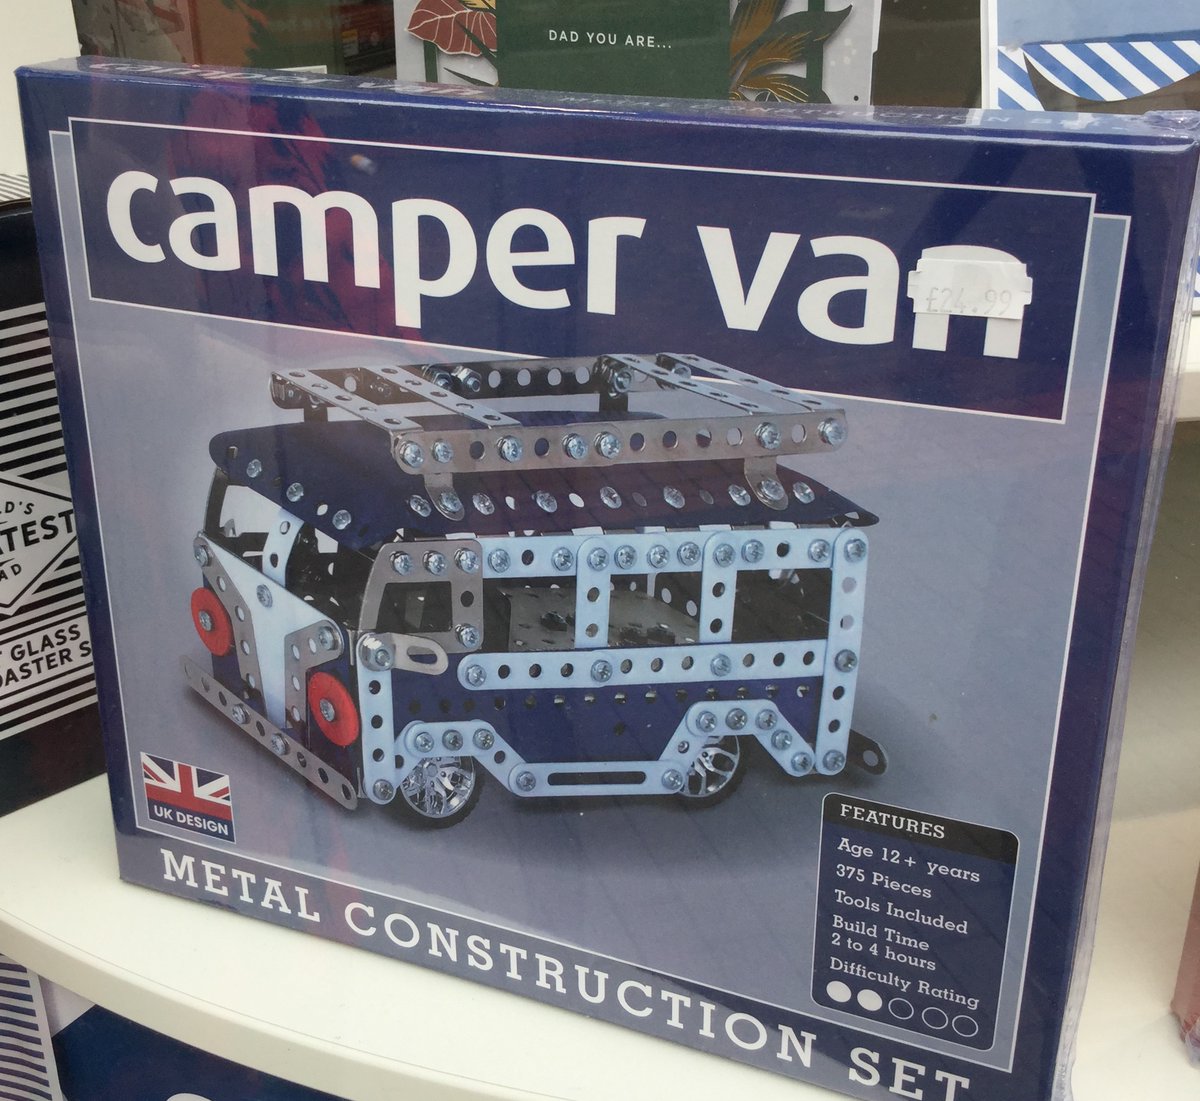 📣 Just a week until Father's Day!
🔧 We bet you'll know some Dads who would love to get stuck into these construction kits from Cardzone ✈️🛩🚐
#cardzonehillstreet #middlesbrough #fathersday #constructionkits #meccano #concorde #spitfire #campervan